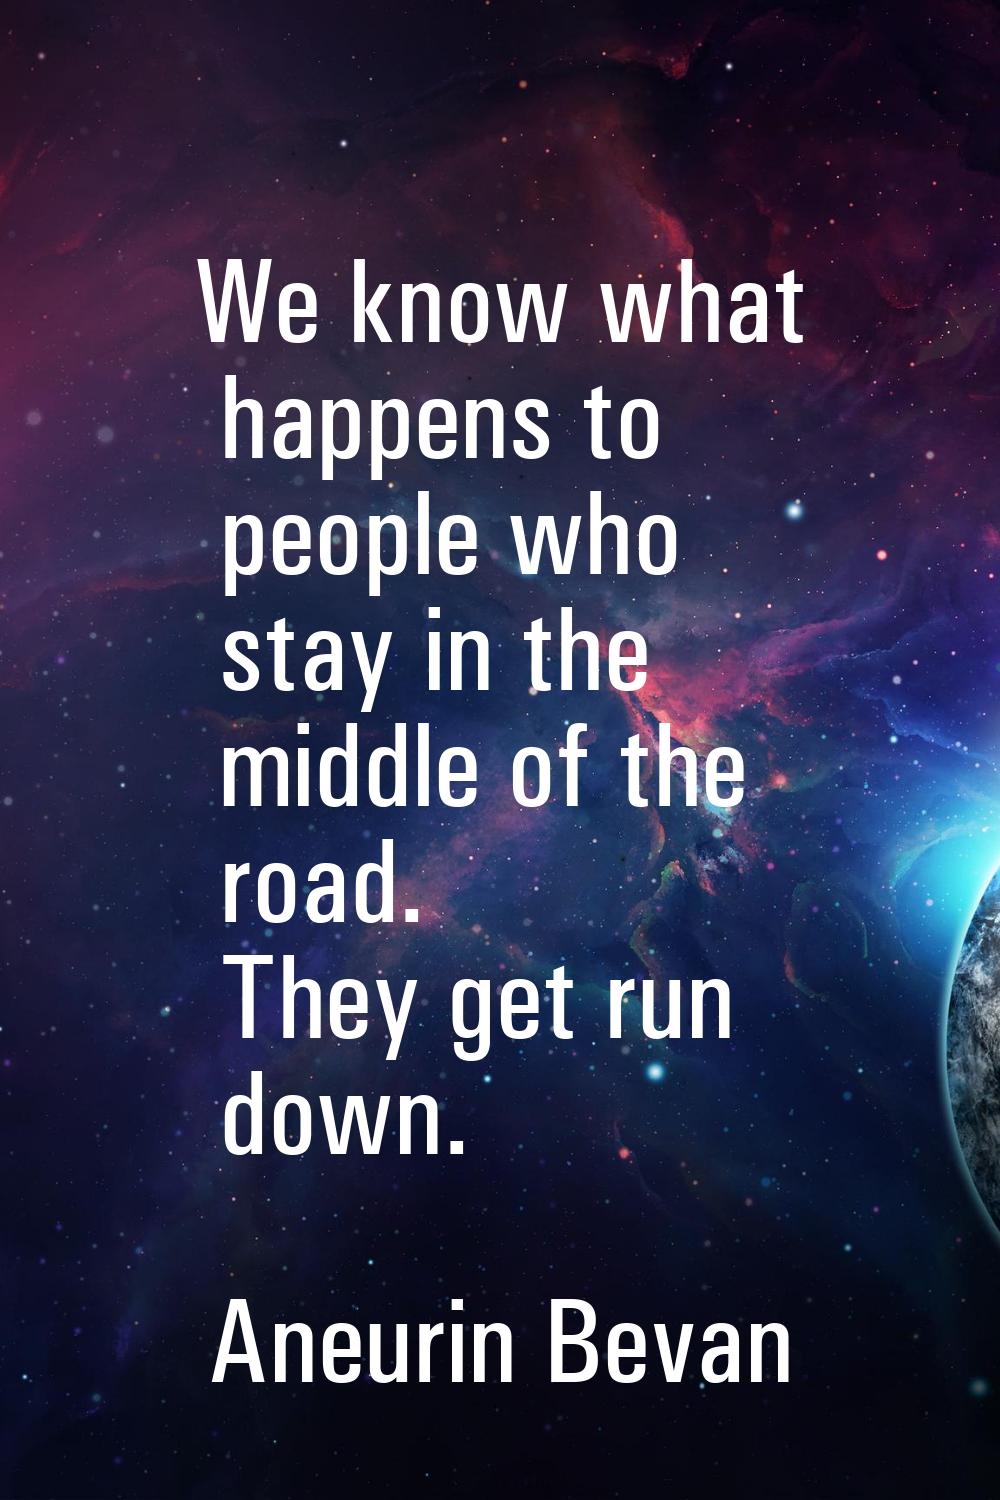 We know what happens to people who stay in the middle of the road. They get run down.